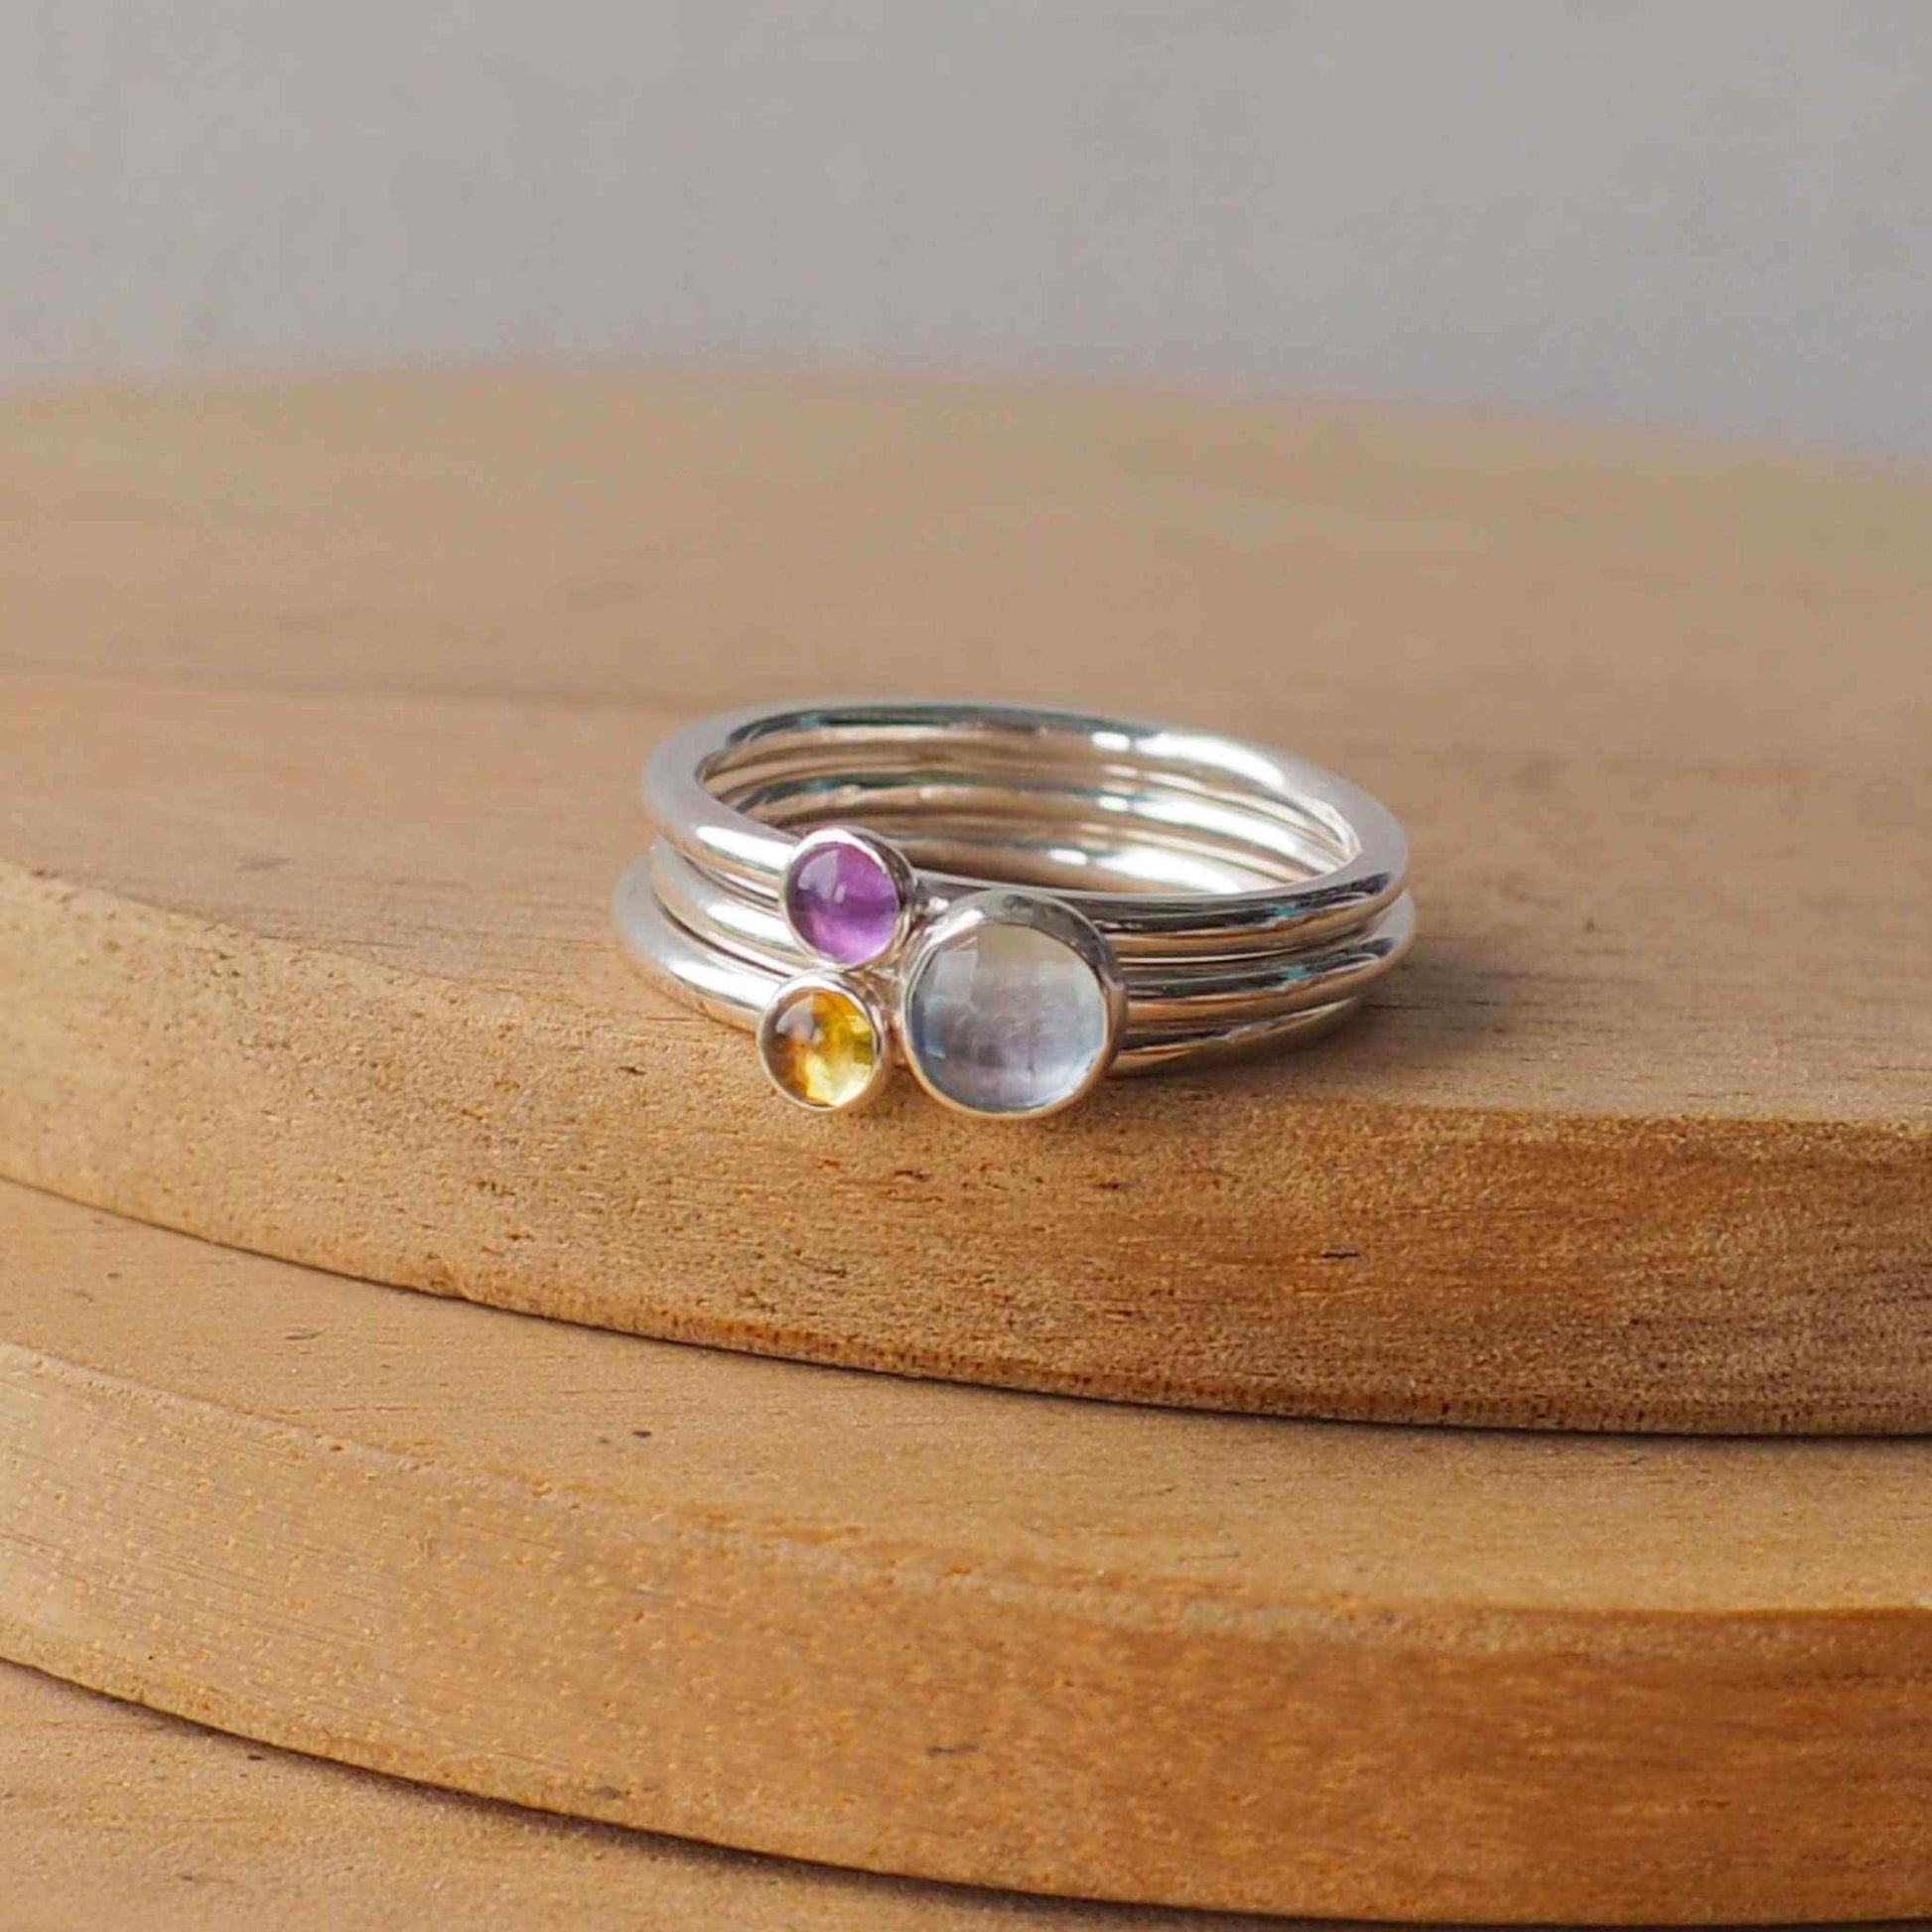 Three Birthstone Ring set with Blue Topaz, Amethyst and Citrine to mark March, February and November Birthdays. The three rings are made with Sterling SIlver and a 5mm blue round cabochon, with two further rings with 3mm round gems in a purple amethyst and yellow citrine. Handmade in Scotland by maram jewellery